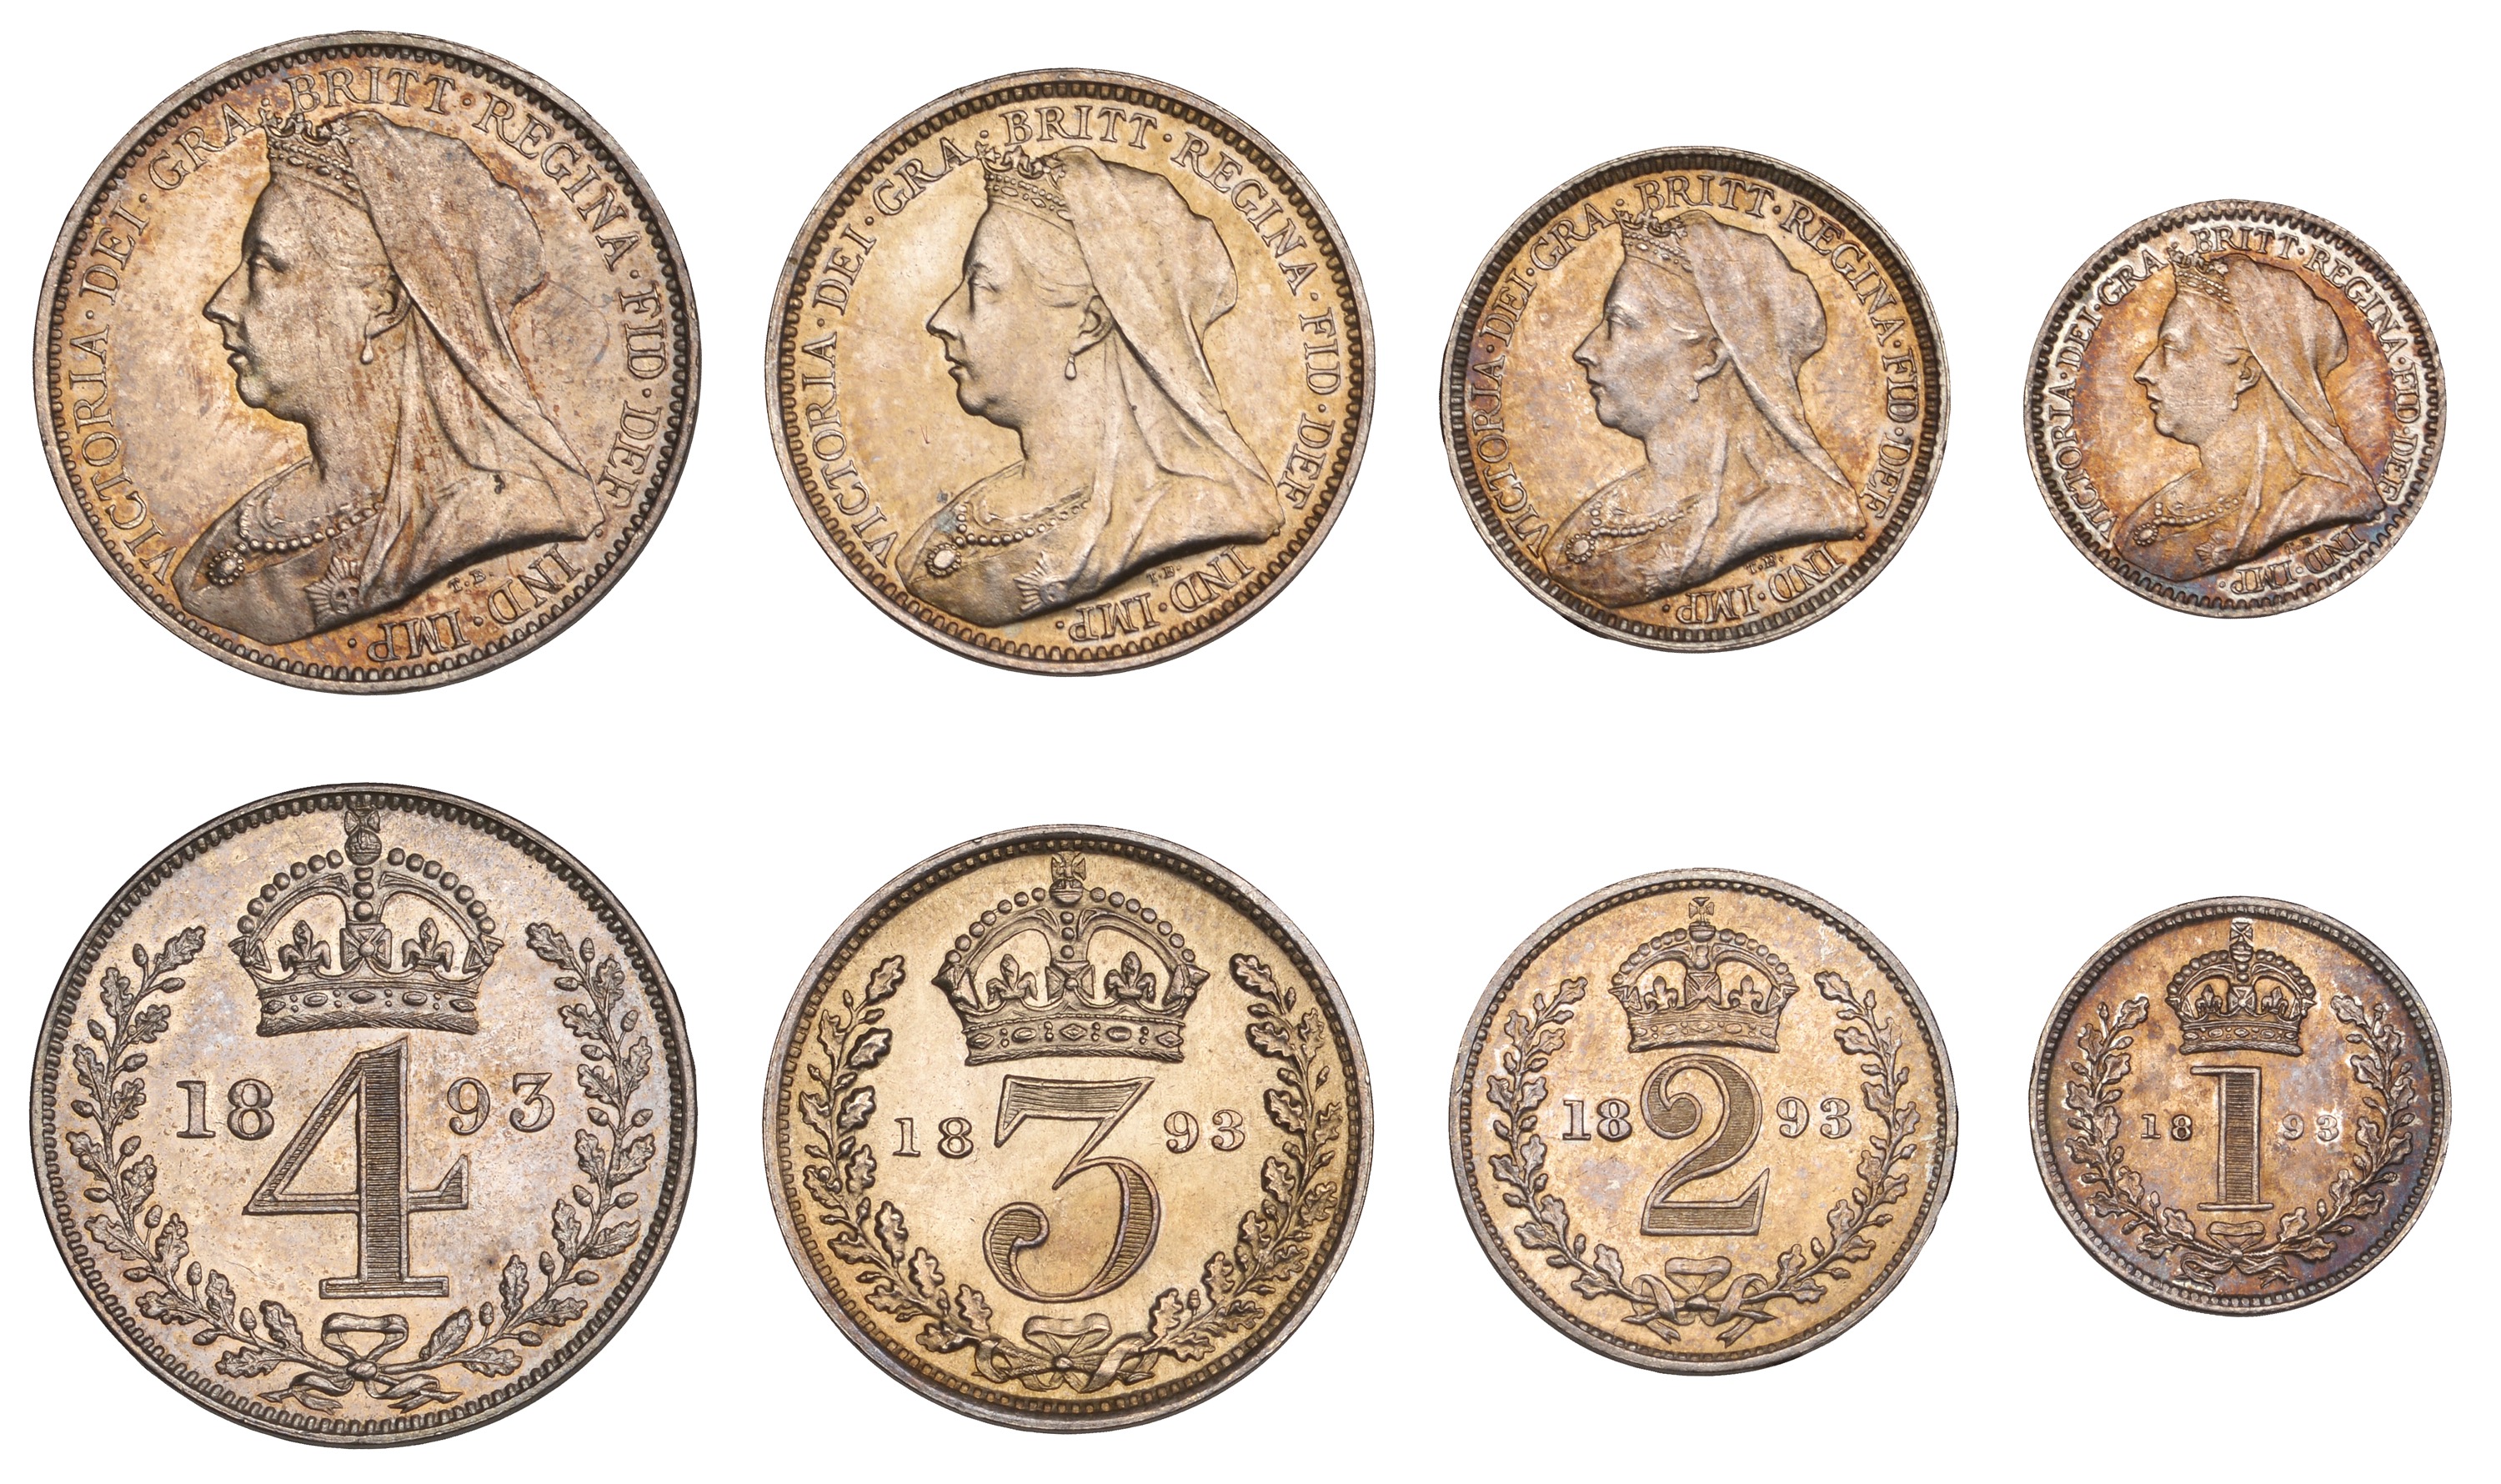 Victoria (1837-1901), Maundy set, 1893 (ESC 3551; S 3943) [4]. Extremely fine or better Â£80...